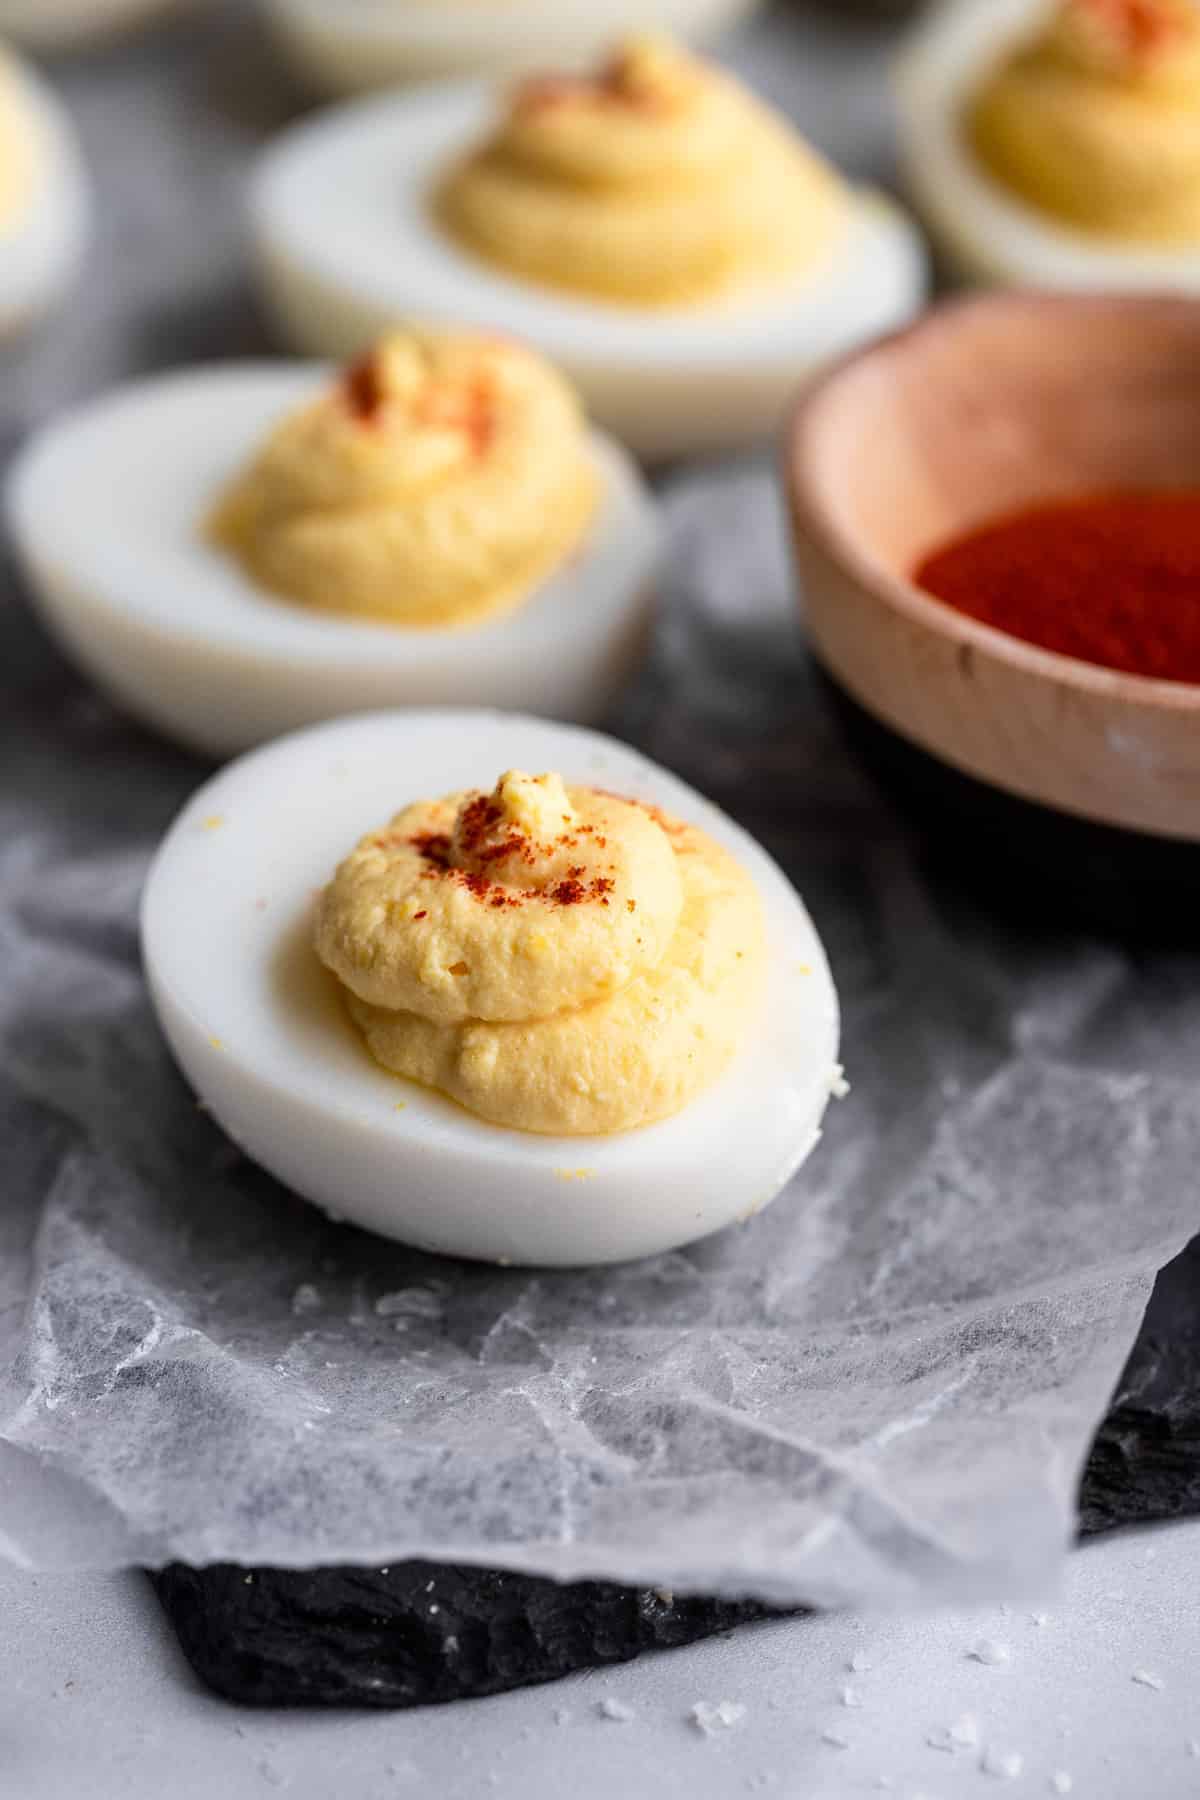 healthy deviled eggs recipe close up of egg with paprika